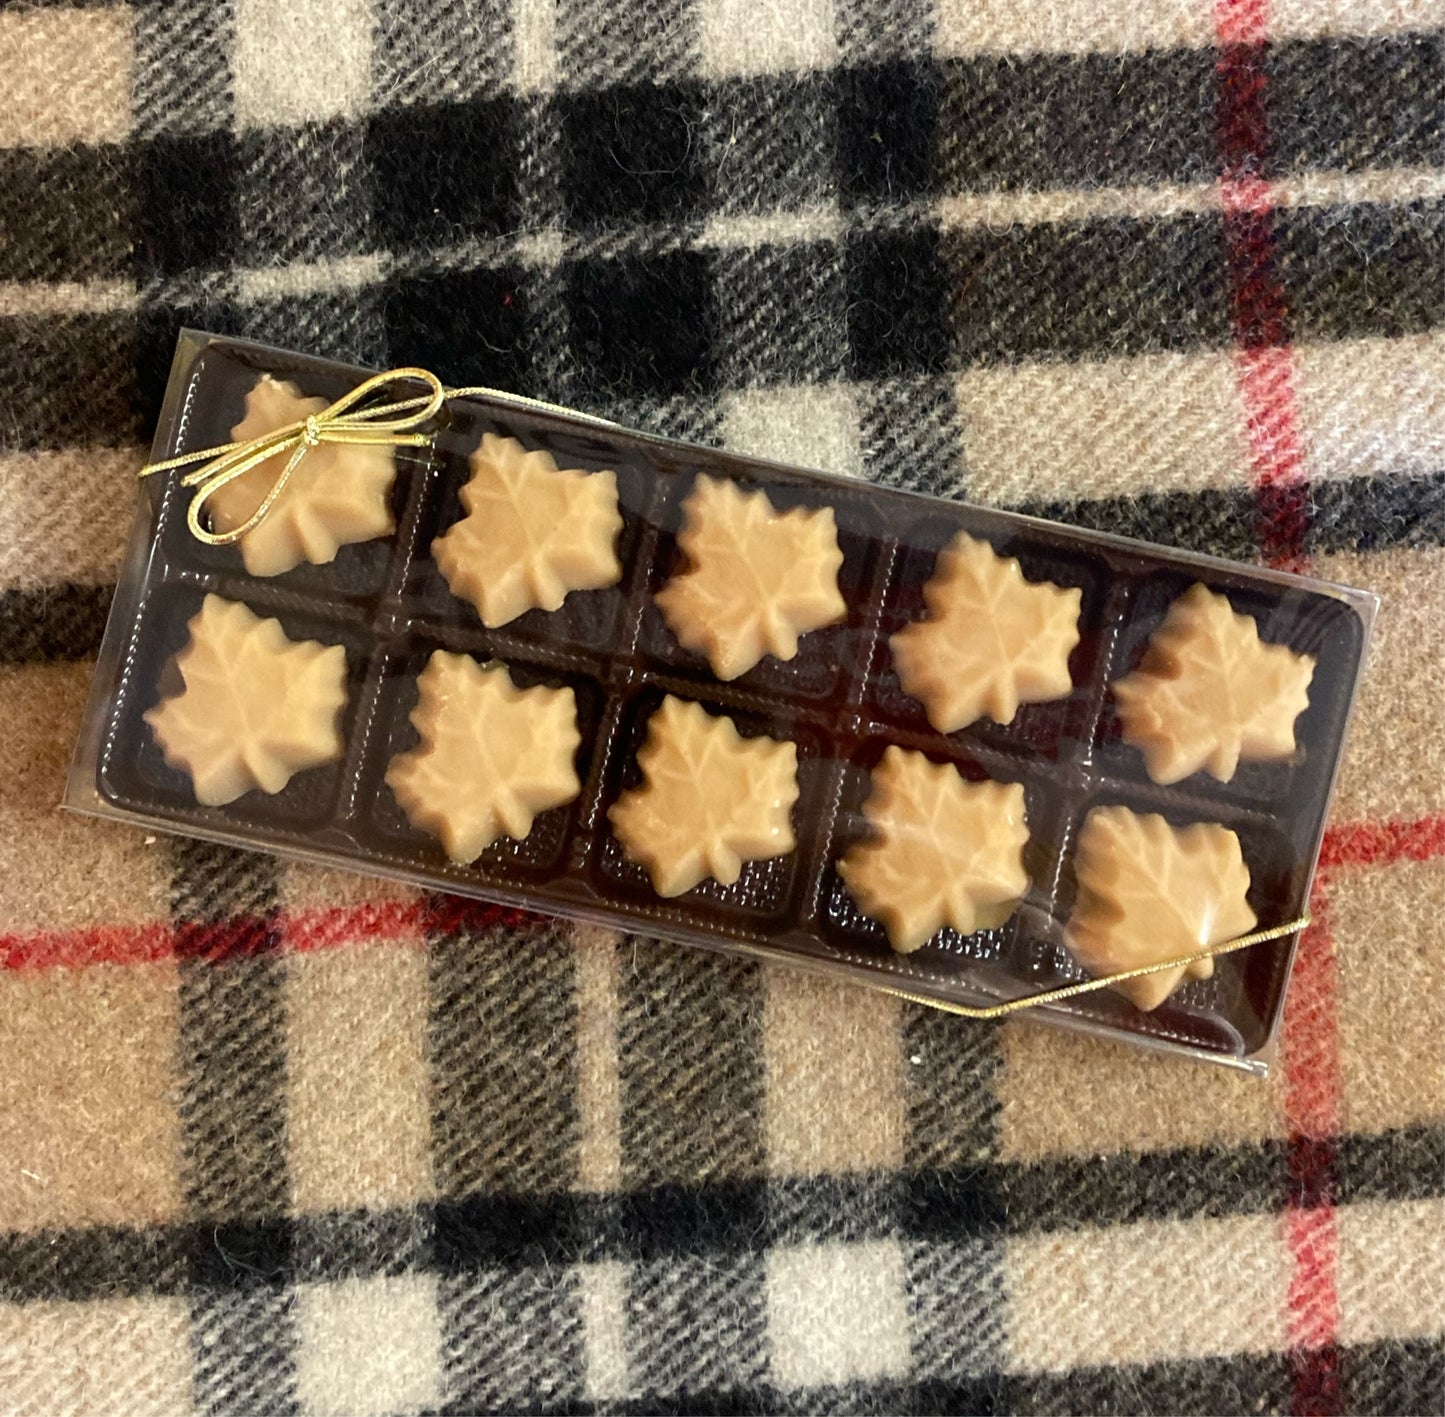 Ten maple sugar candy in a clear topped plastic box with brown tray. Sealed with a gold ribbon